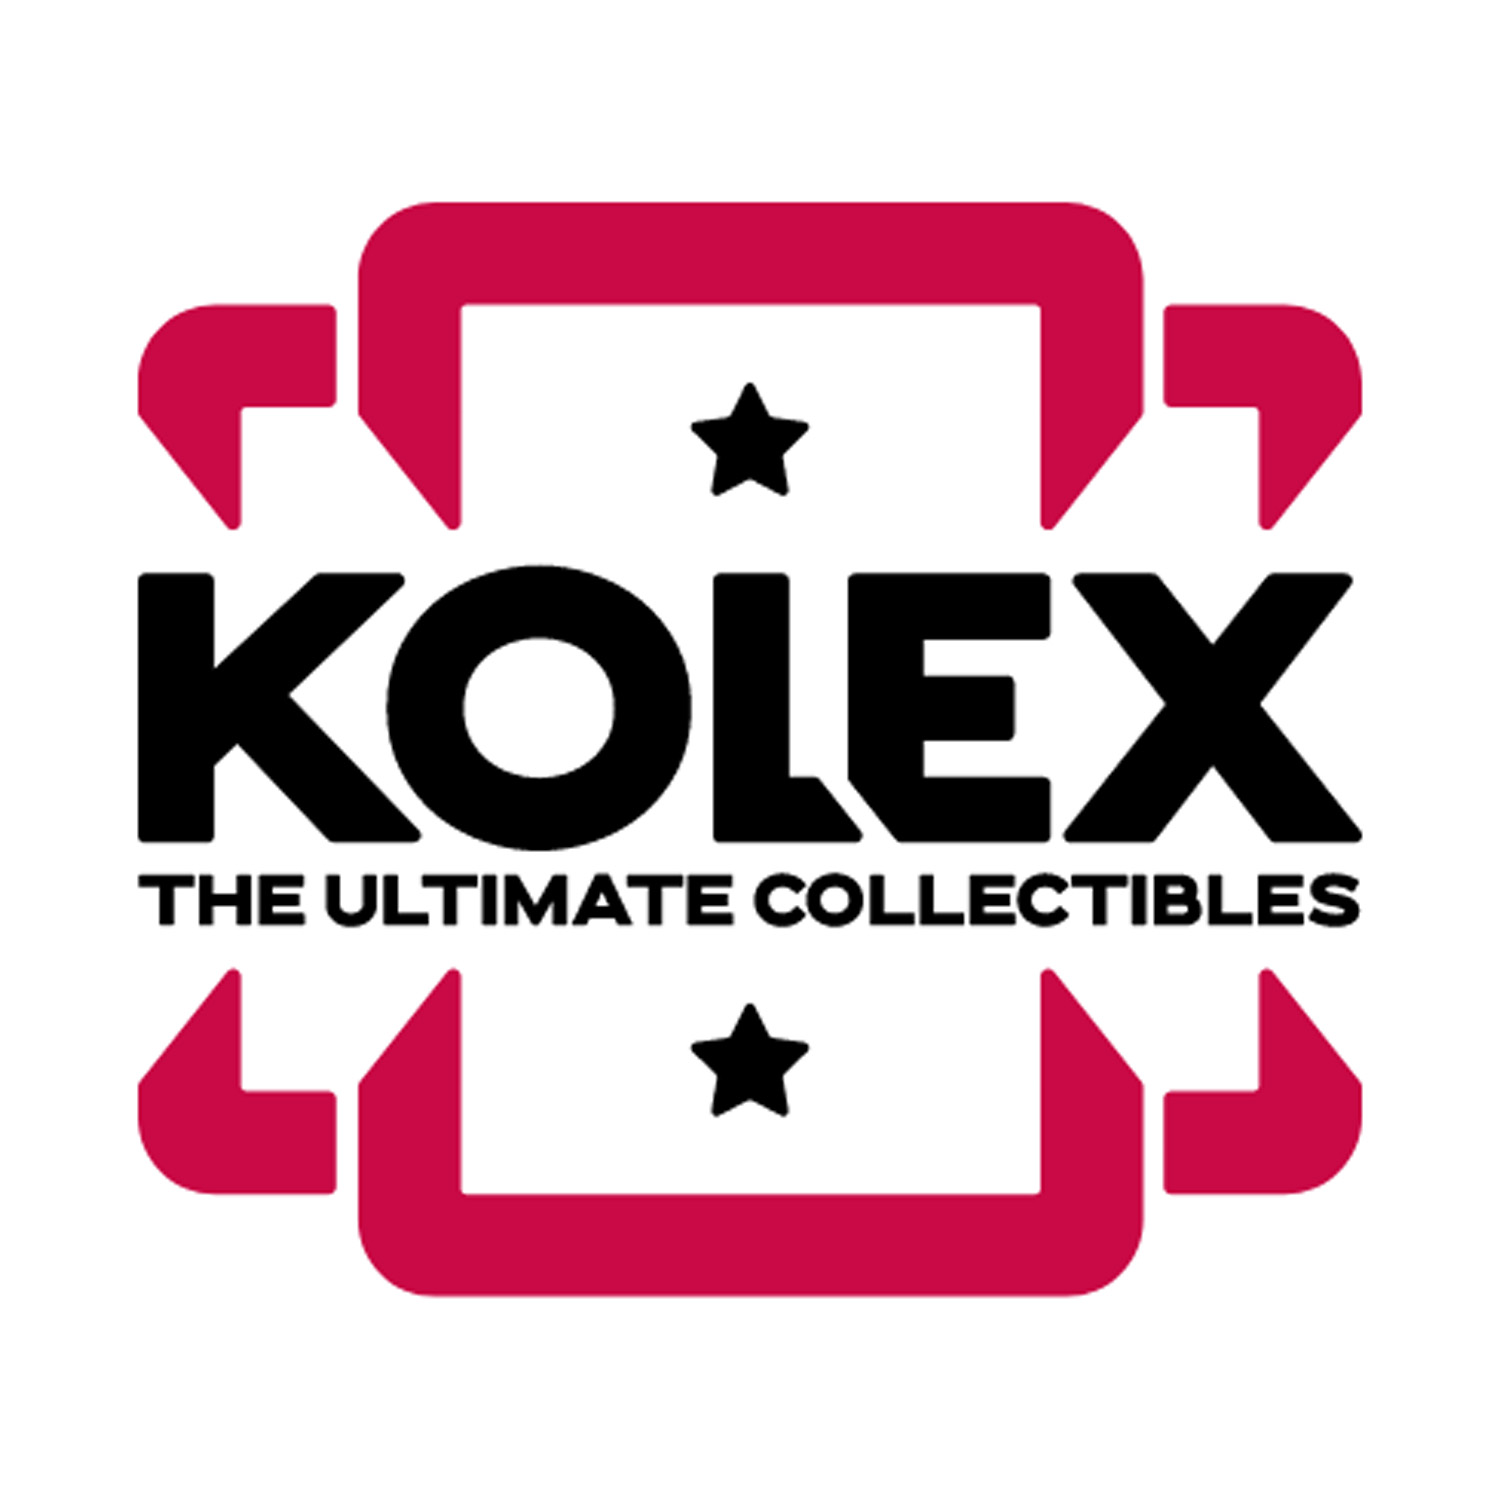 Kolex - the ultimate collectibles